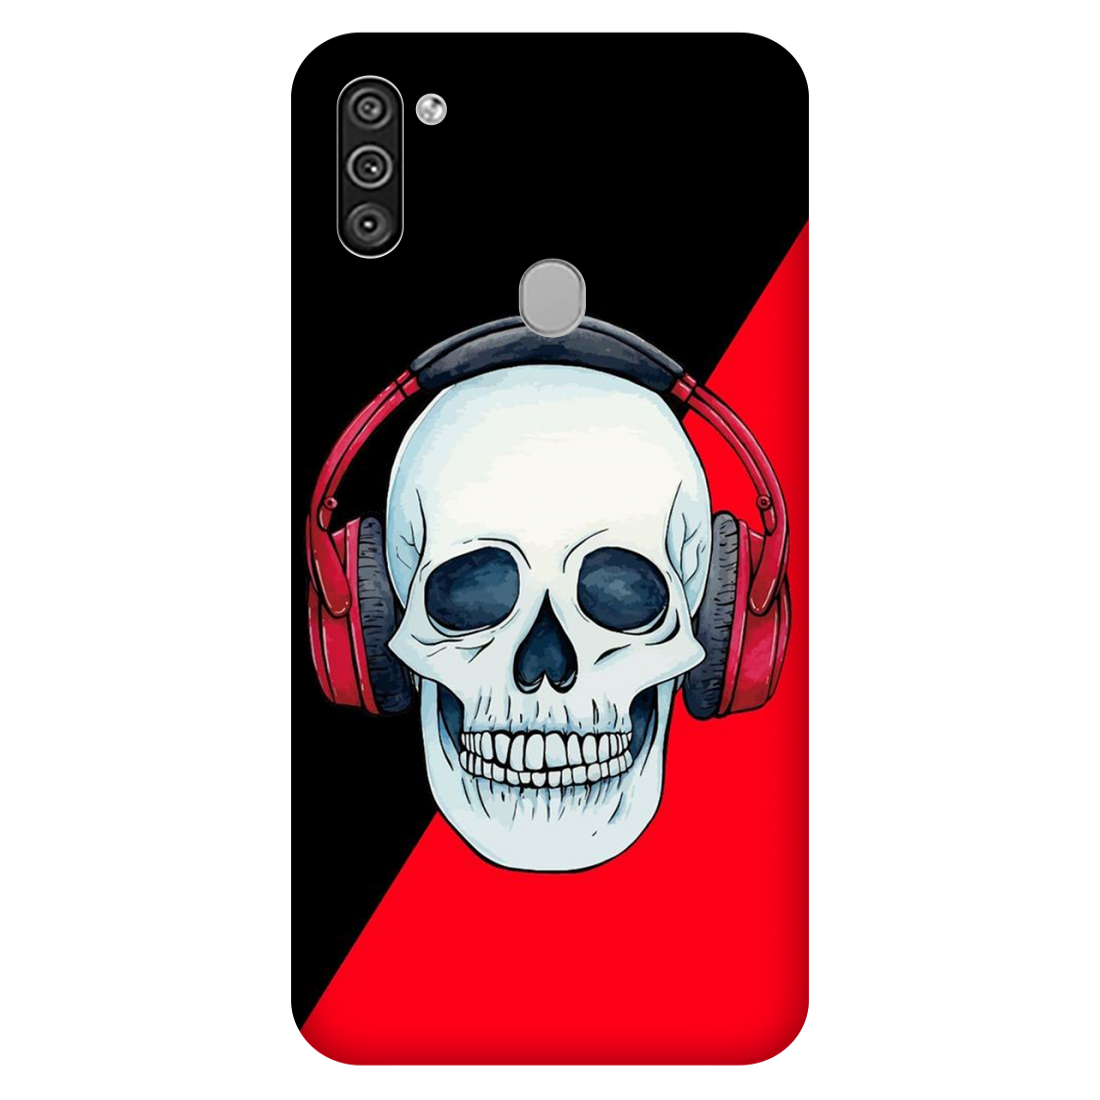 Red Headphones on Blurred Face Case Samsung Galaxy M11 (2020)